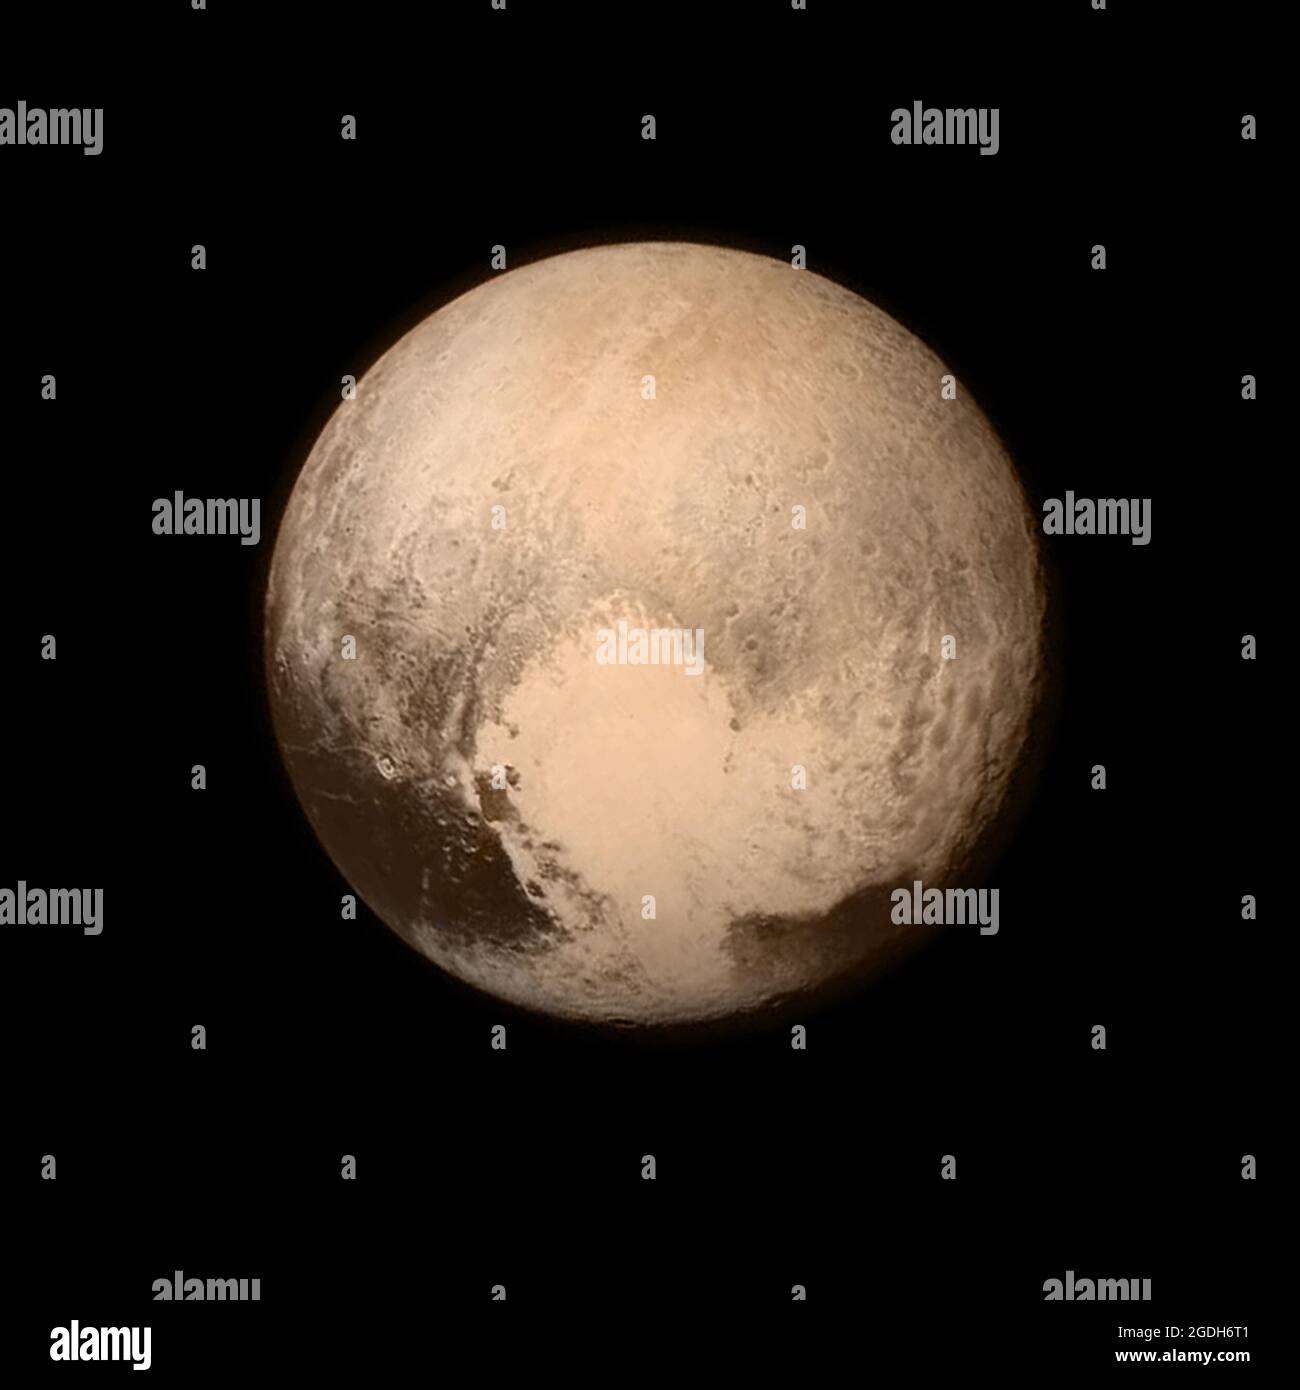 The dwarf planet Pluto as seen from the New Horizons spacecraft, as seen from a distance of 476000 miles. The image was taken with Long Range Reconnaissance Imager (LORRI) Stock Photo